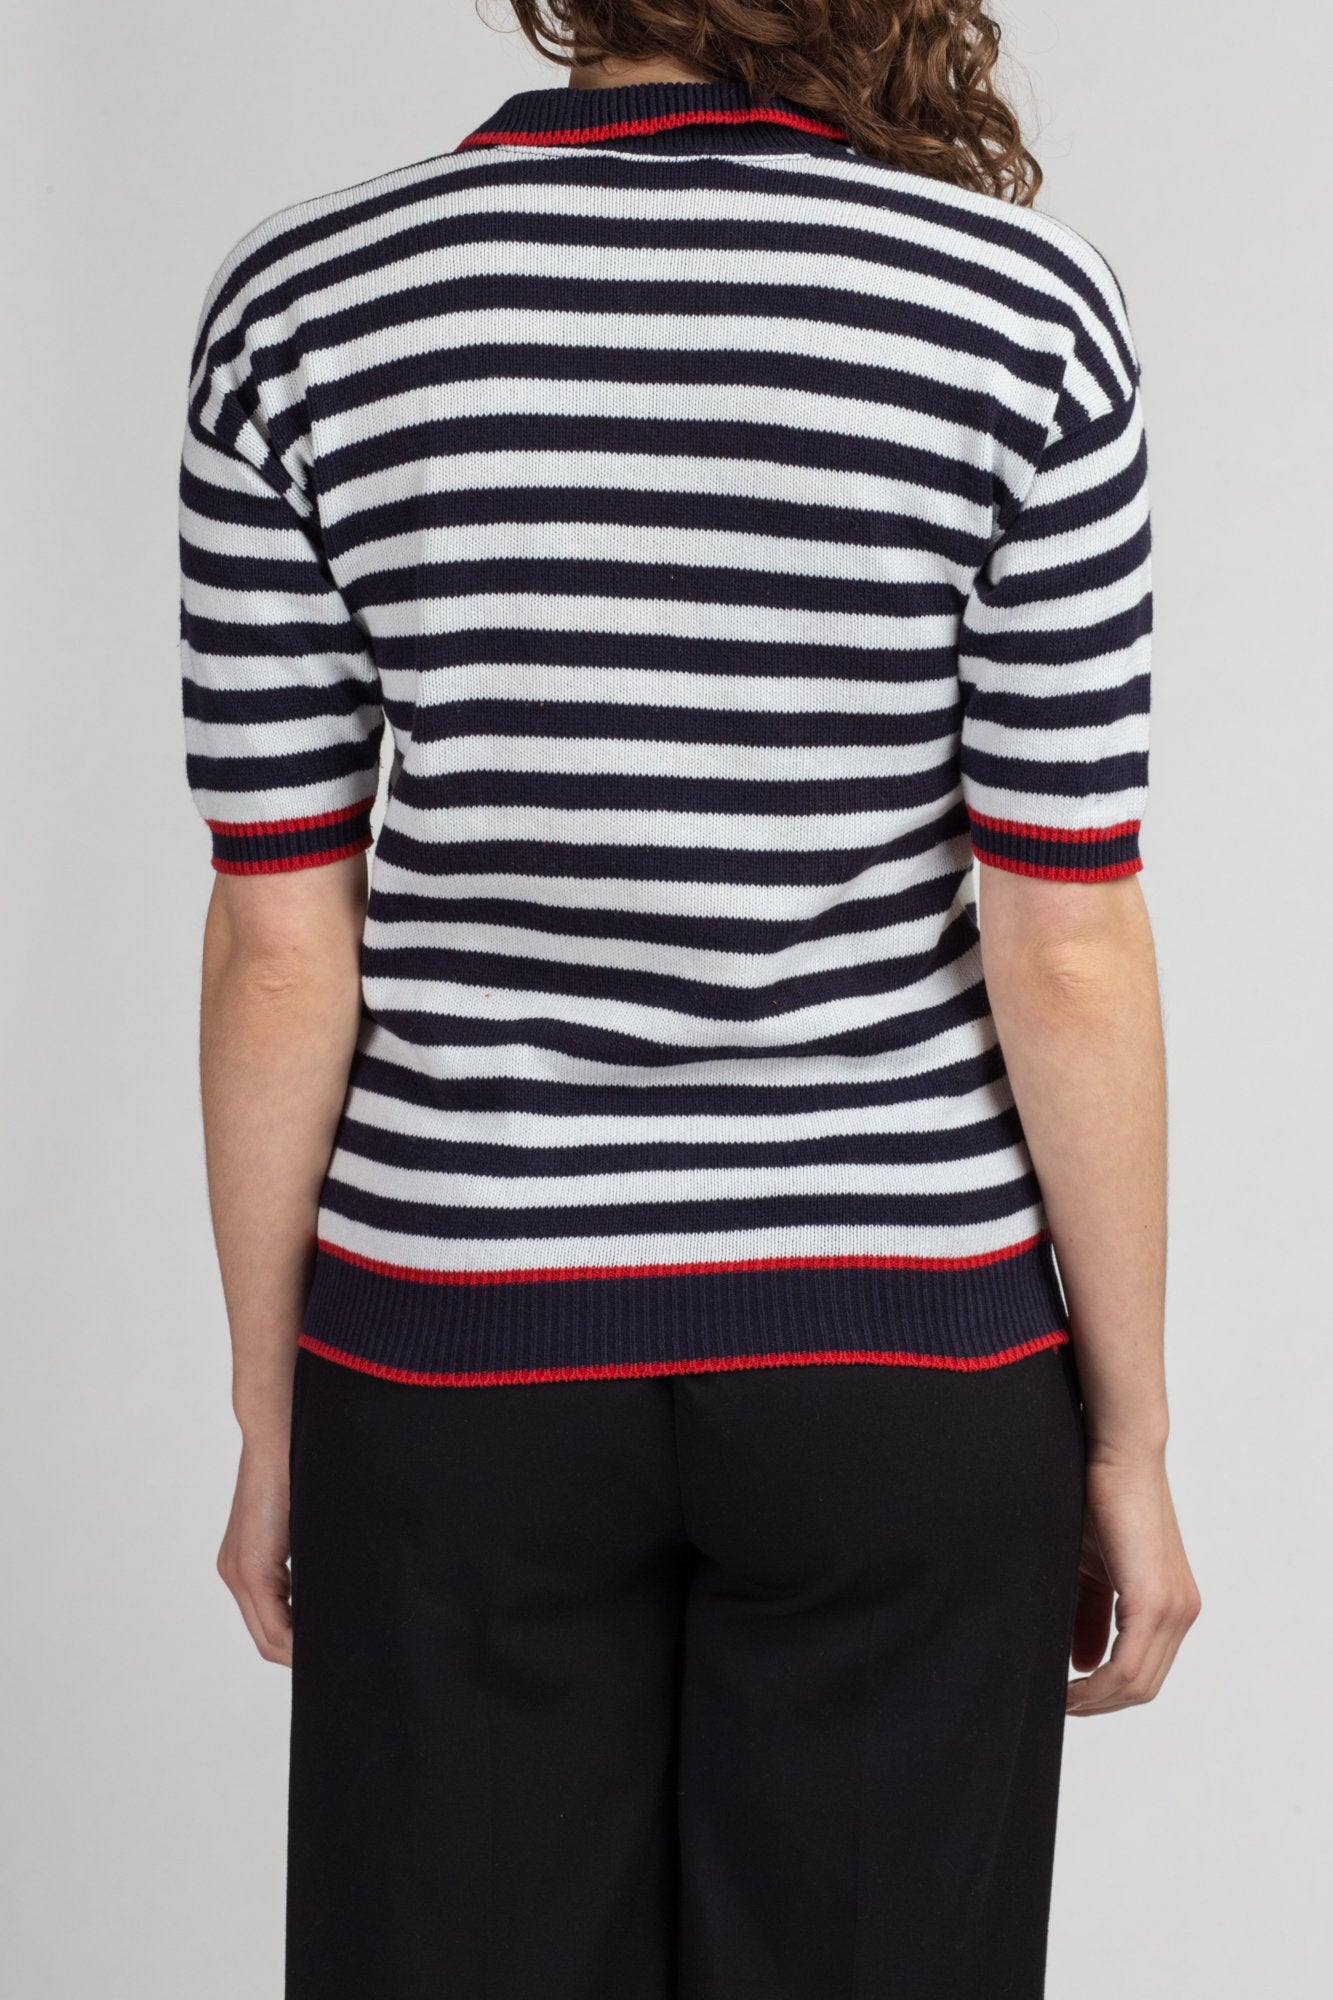 Vintage Deans Of Scotland Striped Knit Polo Shirt - Small | 80s Red Black White Collared Crop Top